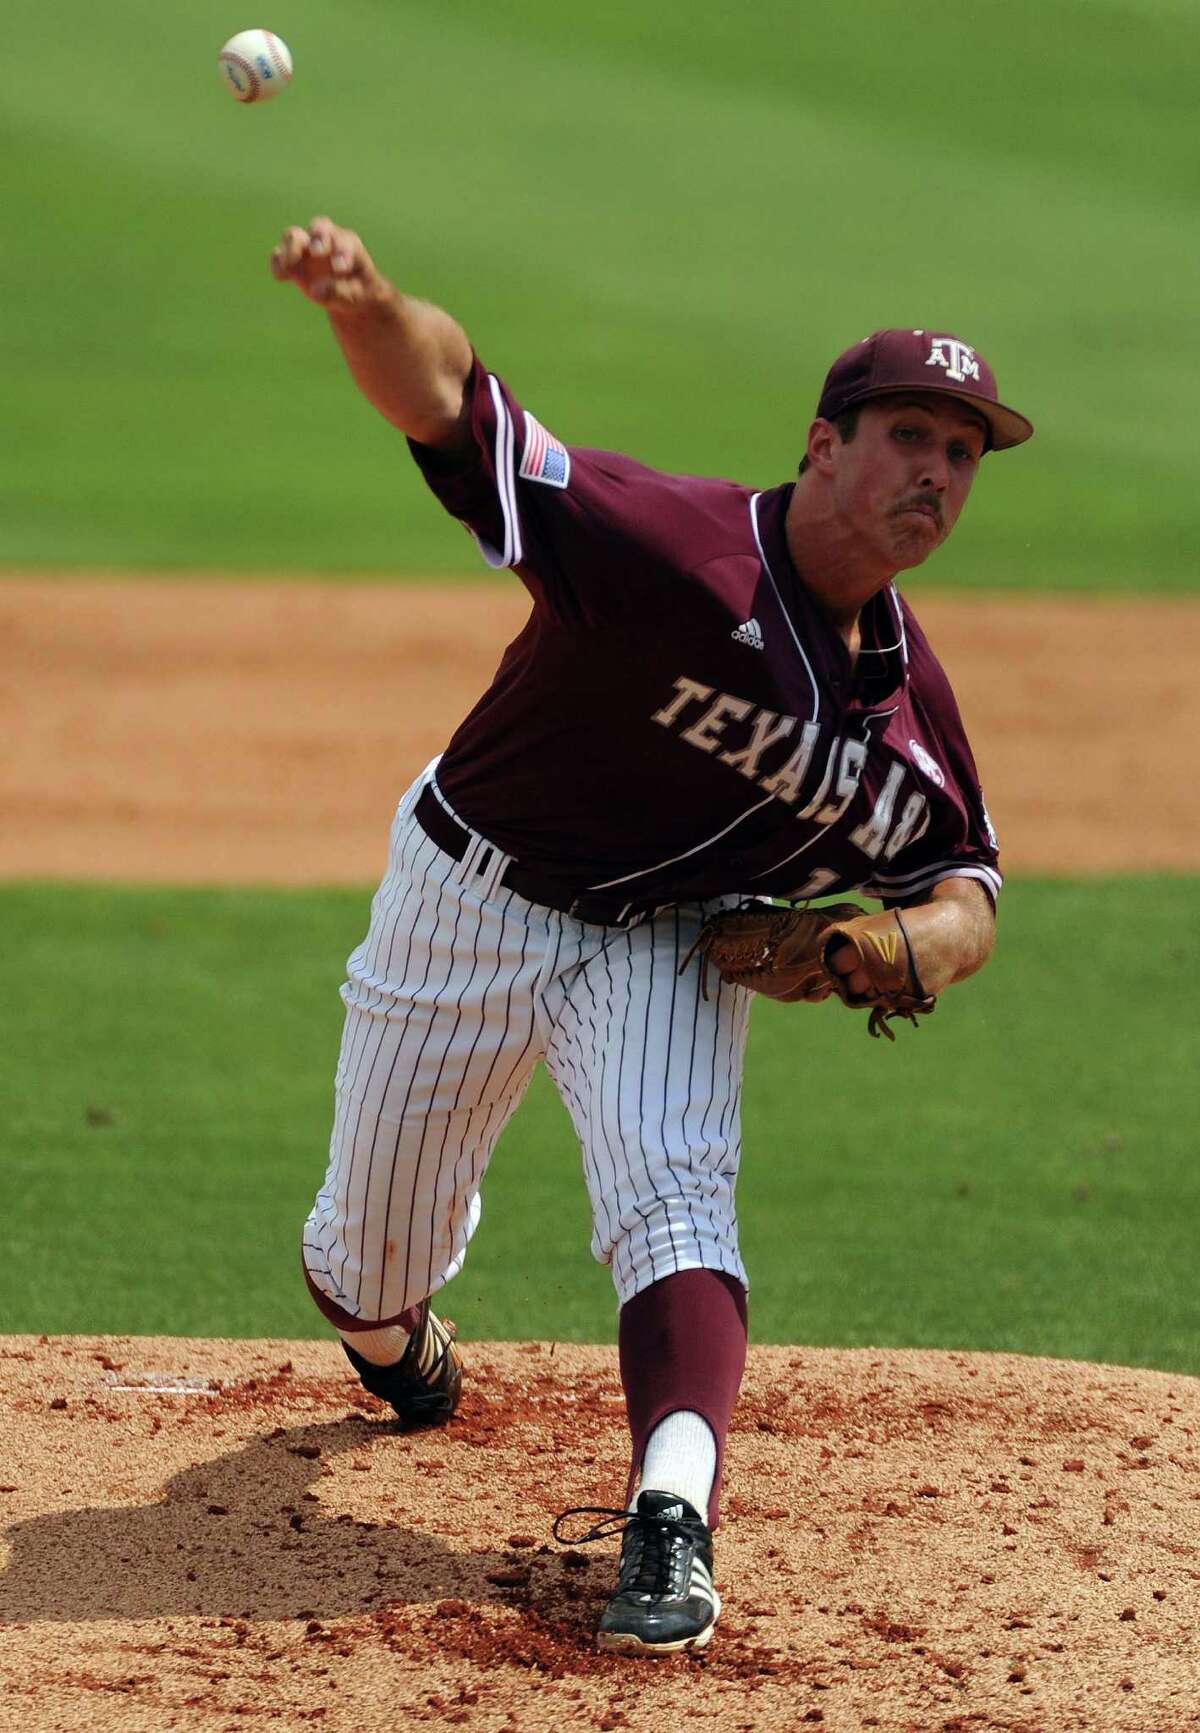 Texas A&M junior righthander Daniel Mengden has four pitches, with a fastball that can reach 94 mph.